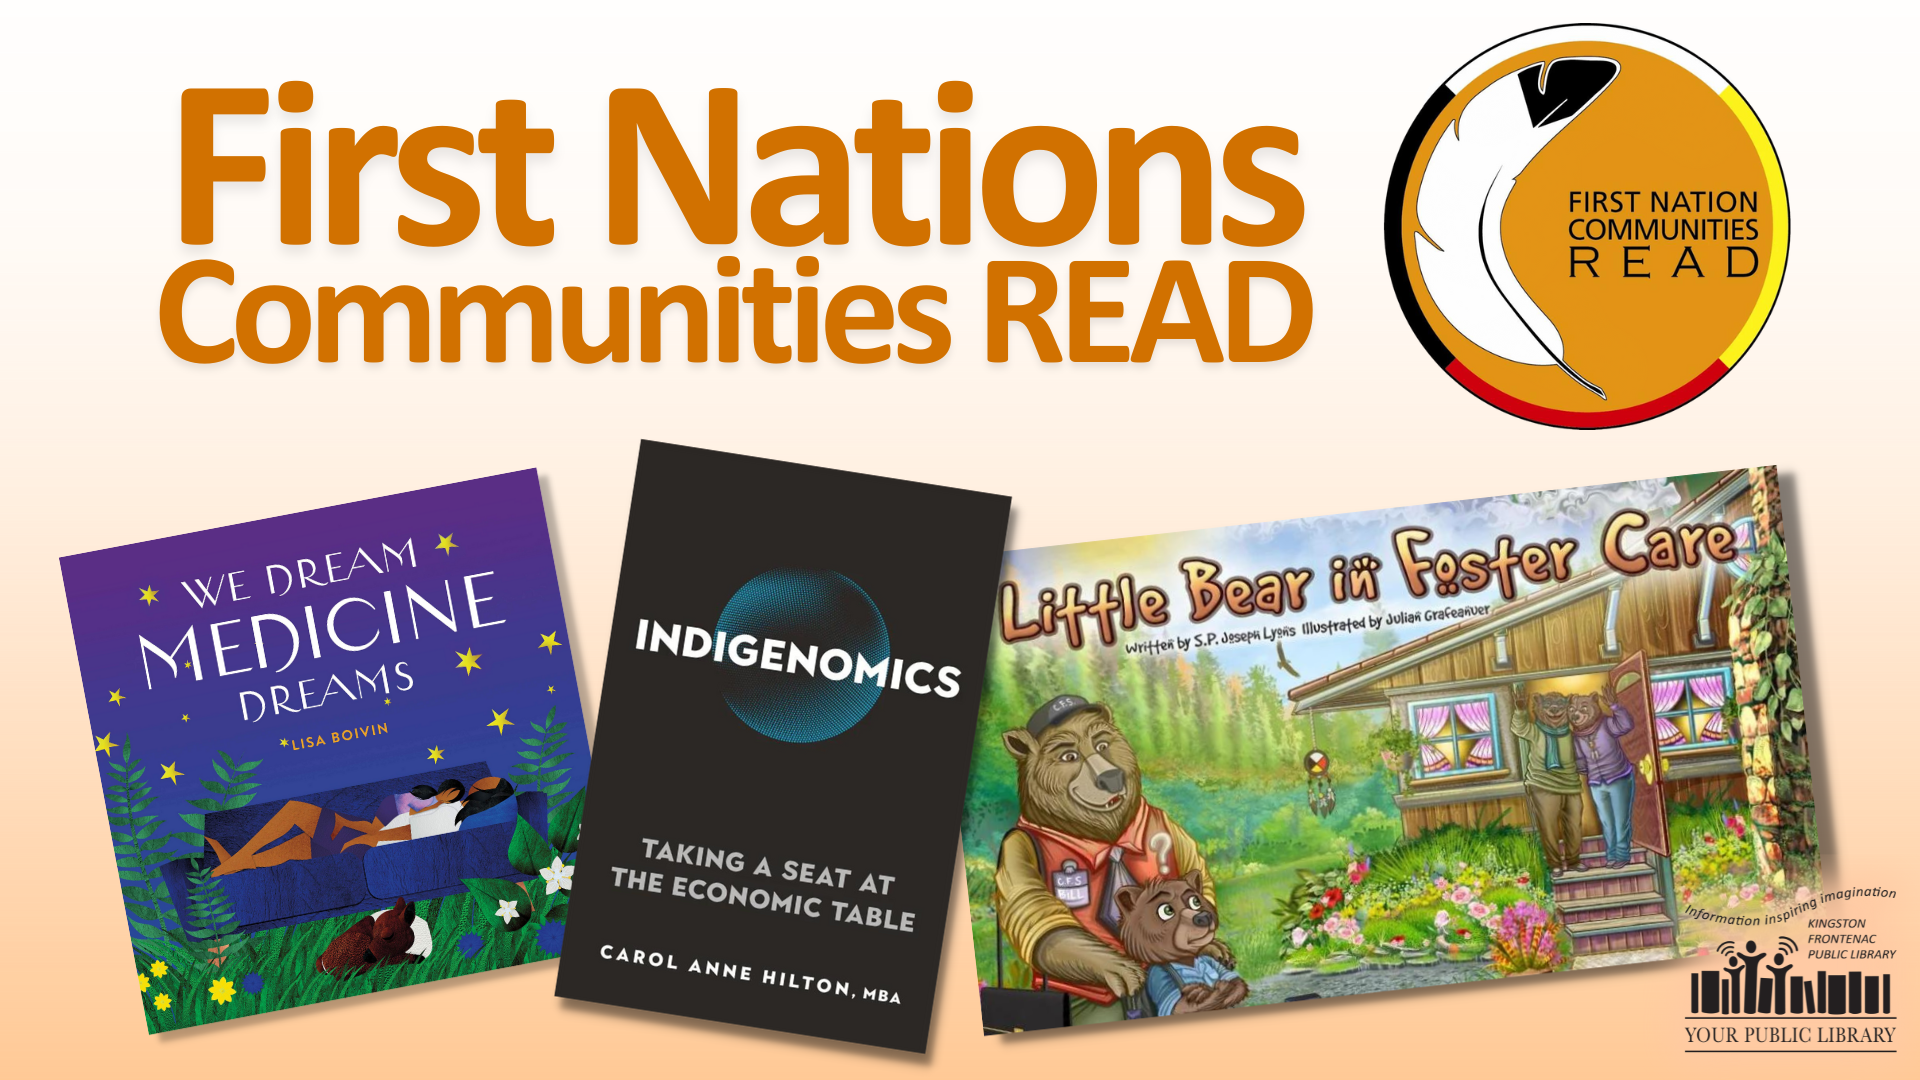 Little Bear in Foster Care, We Dream Medicine Dreams, and Indigenomics. Text reads First Nations Communities READ.